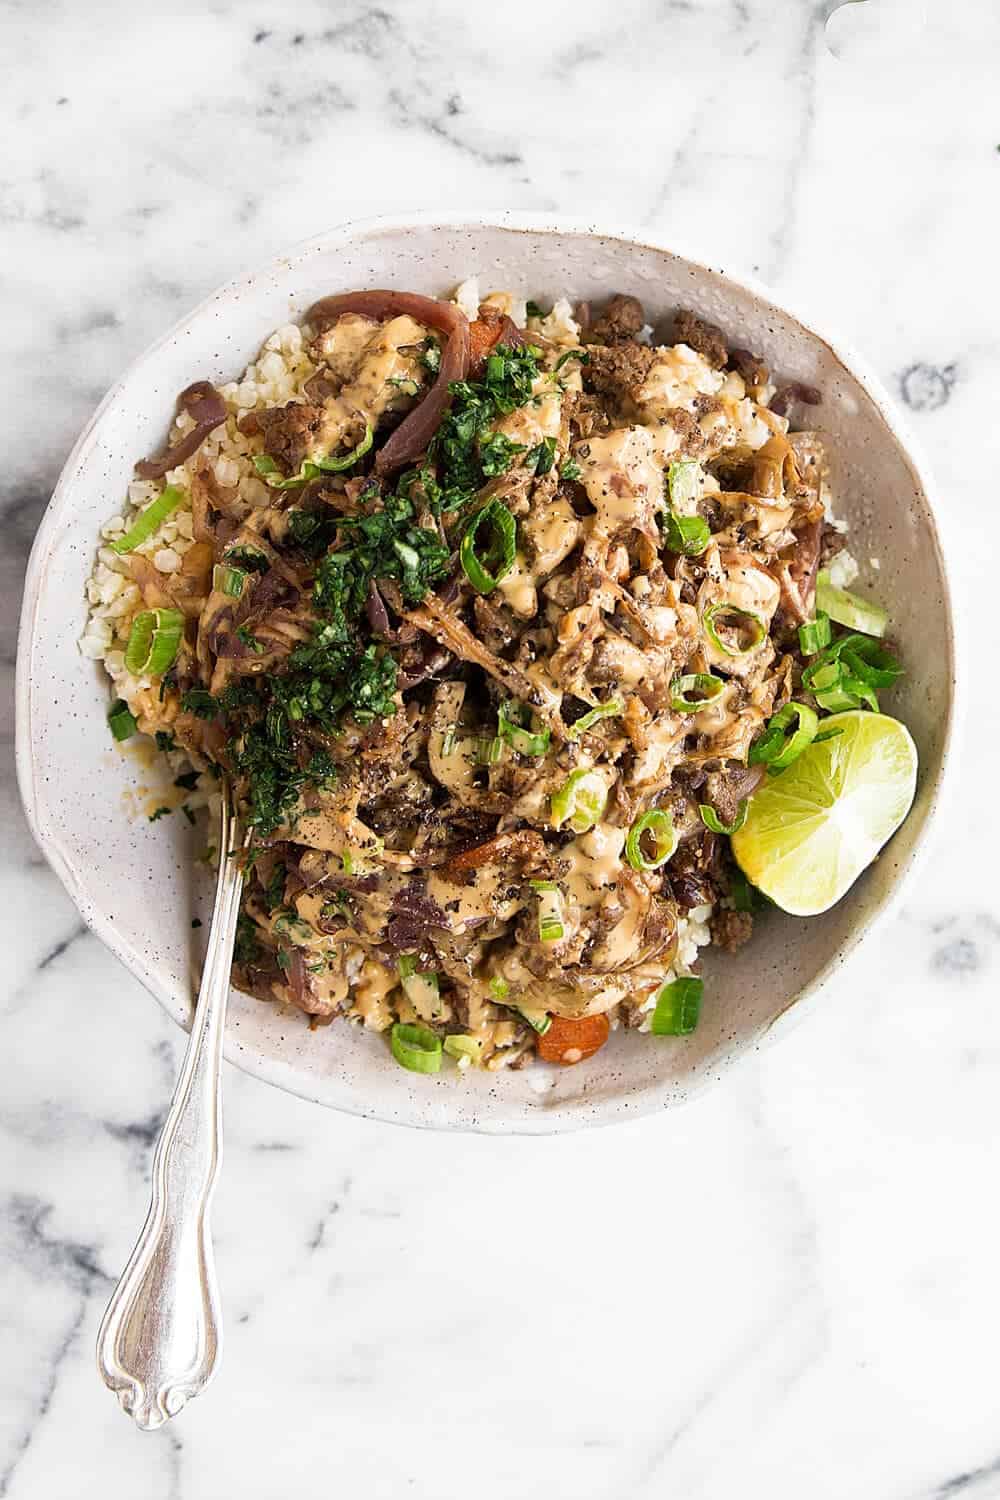 Whole30 Egg Roll in a Bowl. The most delicious one pan meal: egg roll in a bowl loaded up with plenty of cabbage, protein & a creamy sauce. Whole30 dinner recipes. Easy whole30 recipes. Whole30 lunch recipes. Paleo egg roll in a bowl recipe. Low carb egg roll in a bowl. Whole30 bowl recipe. whole30 meal plan. Easy whole30 dinner recipes. Easy whole30 breakfast recipes. Whole30 recipes. Whole30 lunch. Whole30 meal planning. Whole30 meal prep. Healthy paleo meals. Healthy Whole30 recipes. Easy Whole30 recipes.